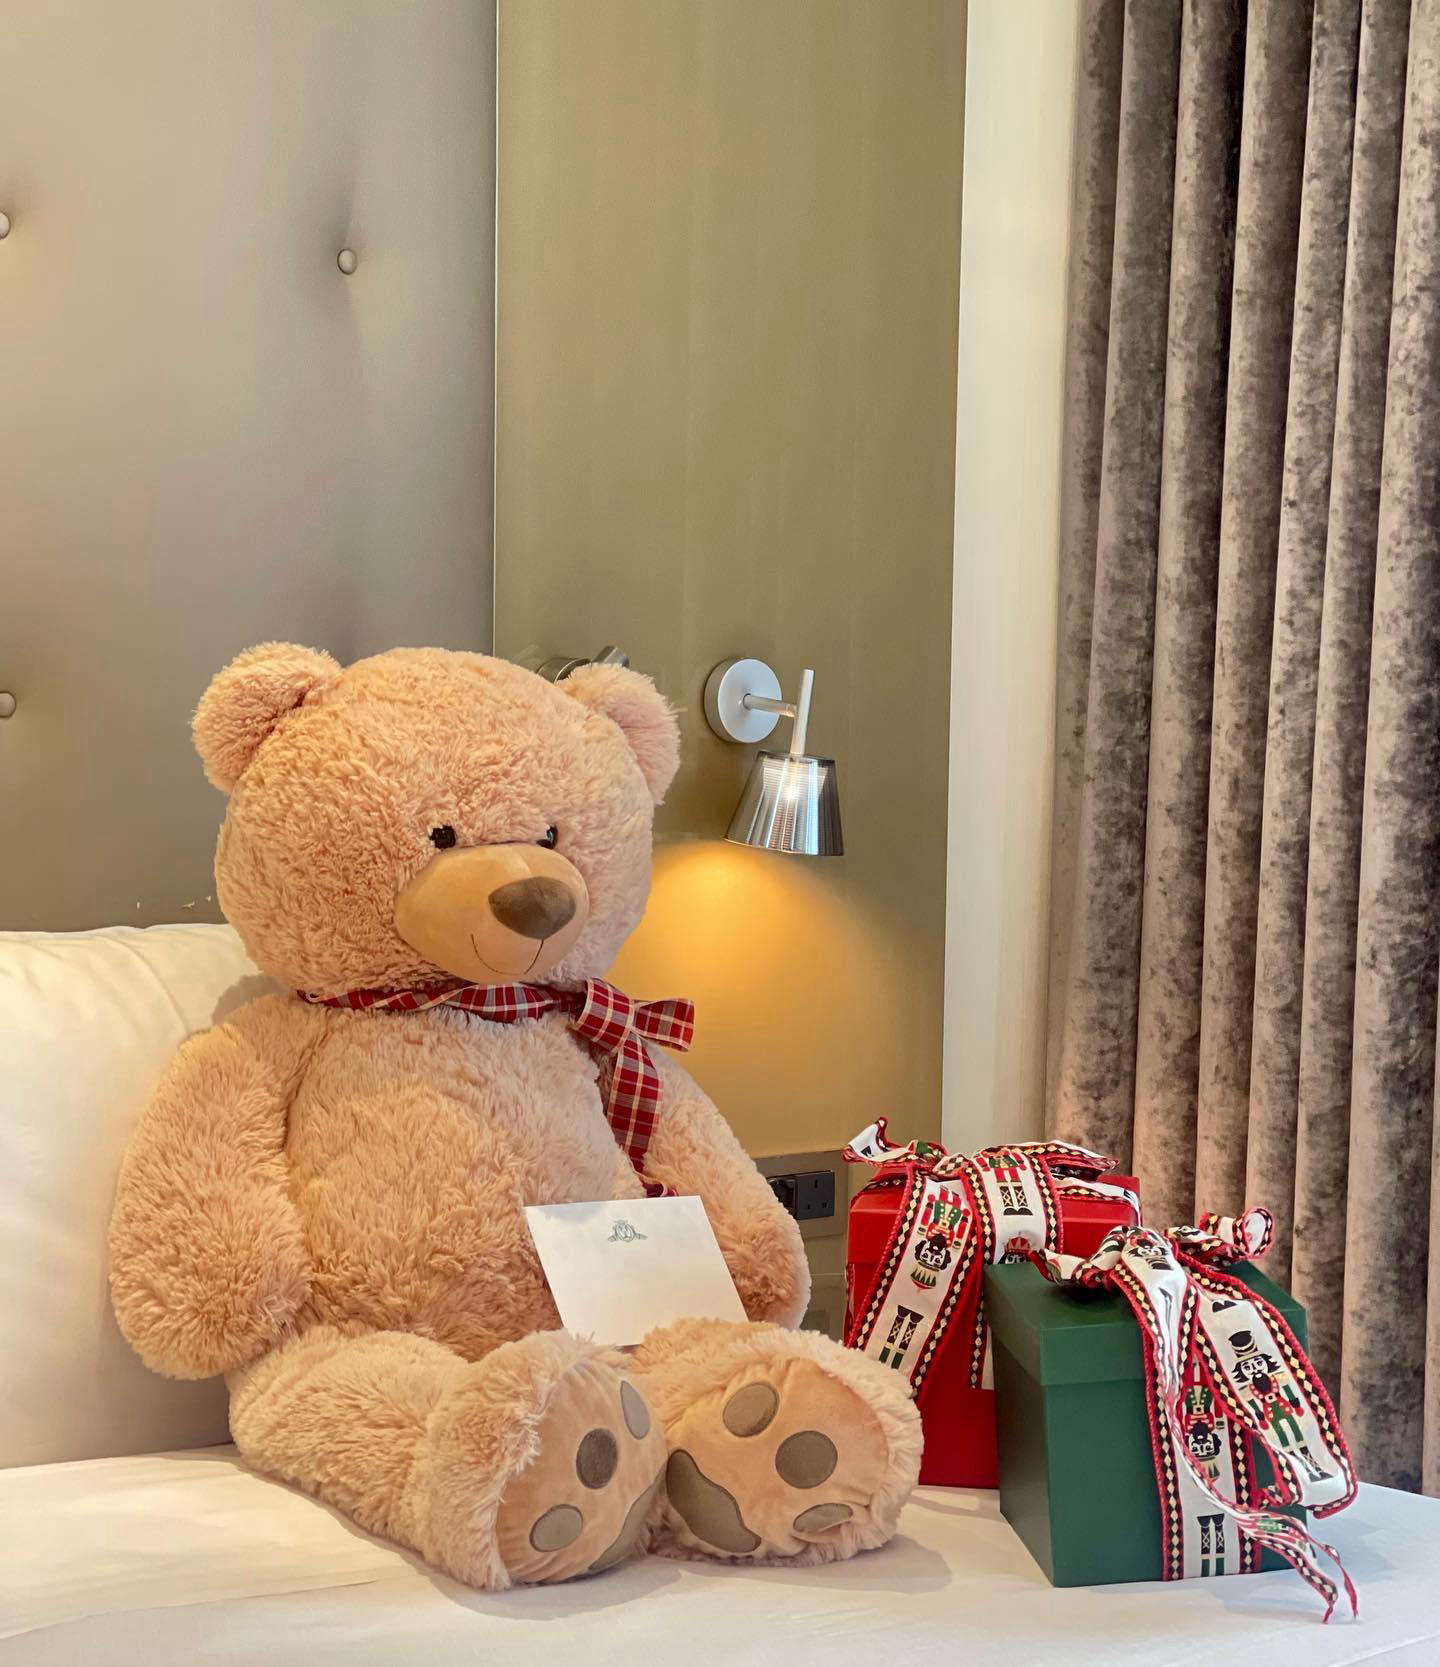 Excelsior Hotel Gallia, Milan - Surprise your loved ones with a luxury stay during the festive seaso